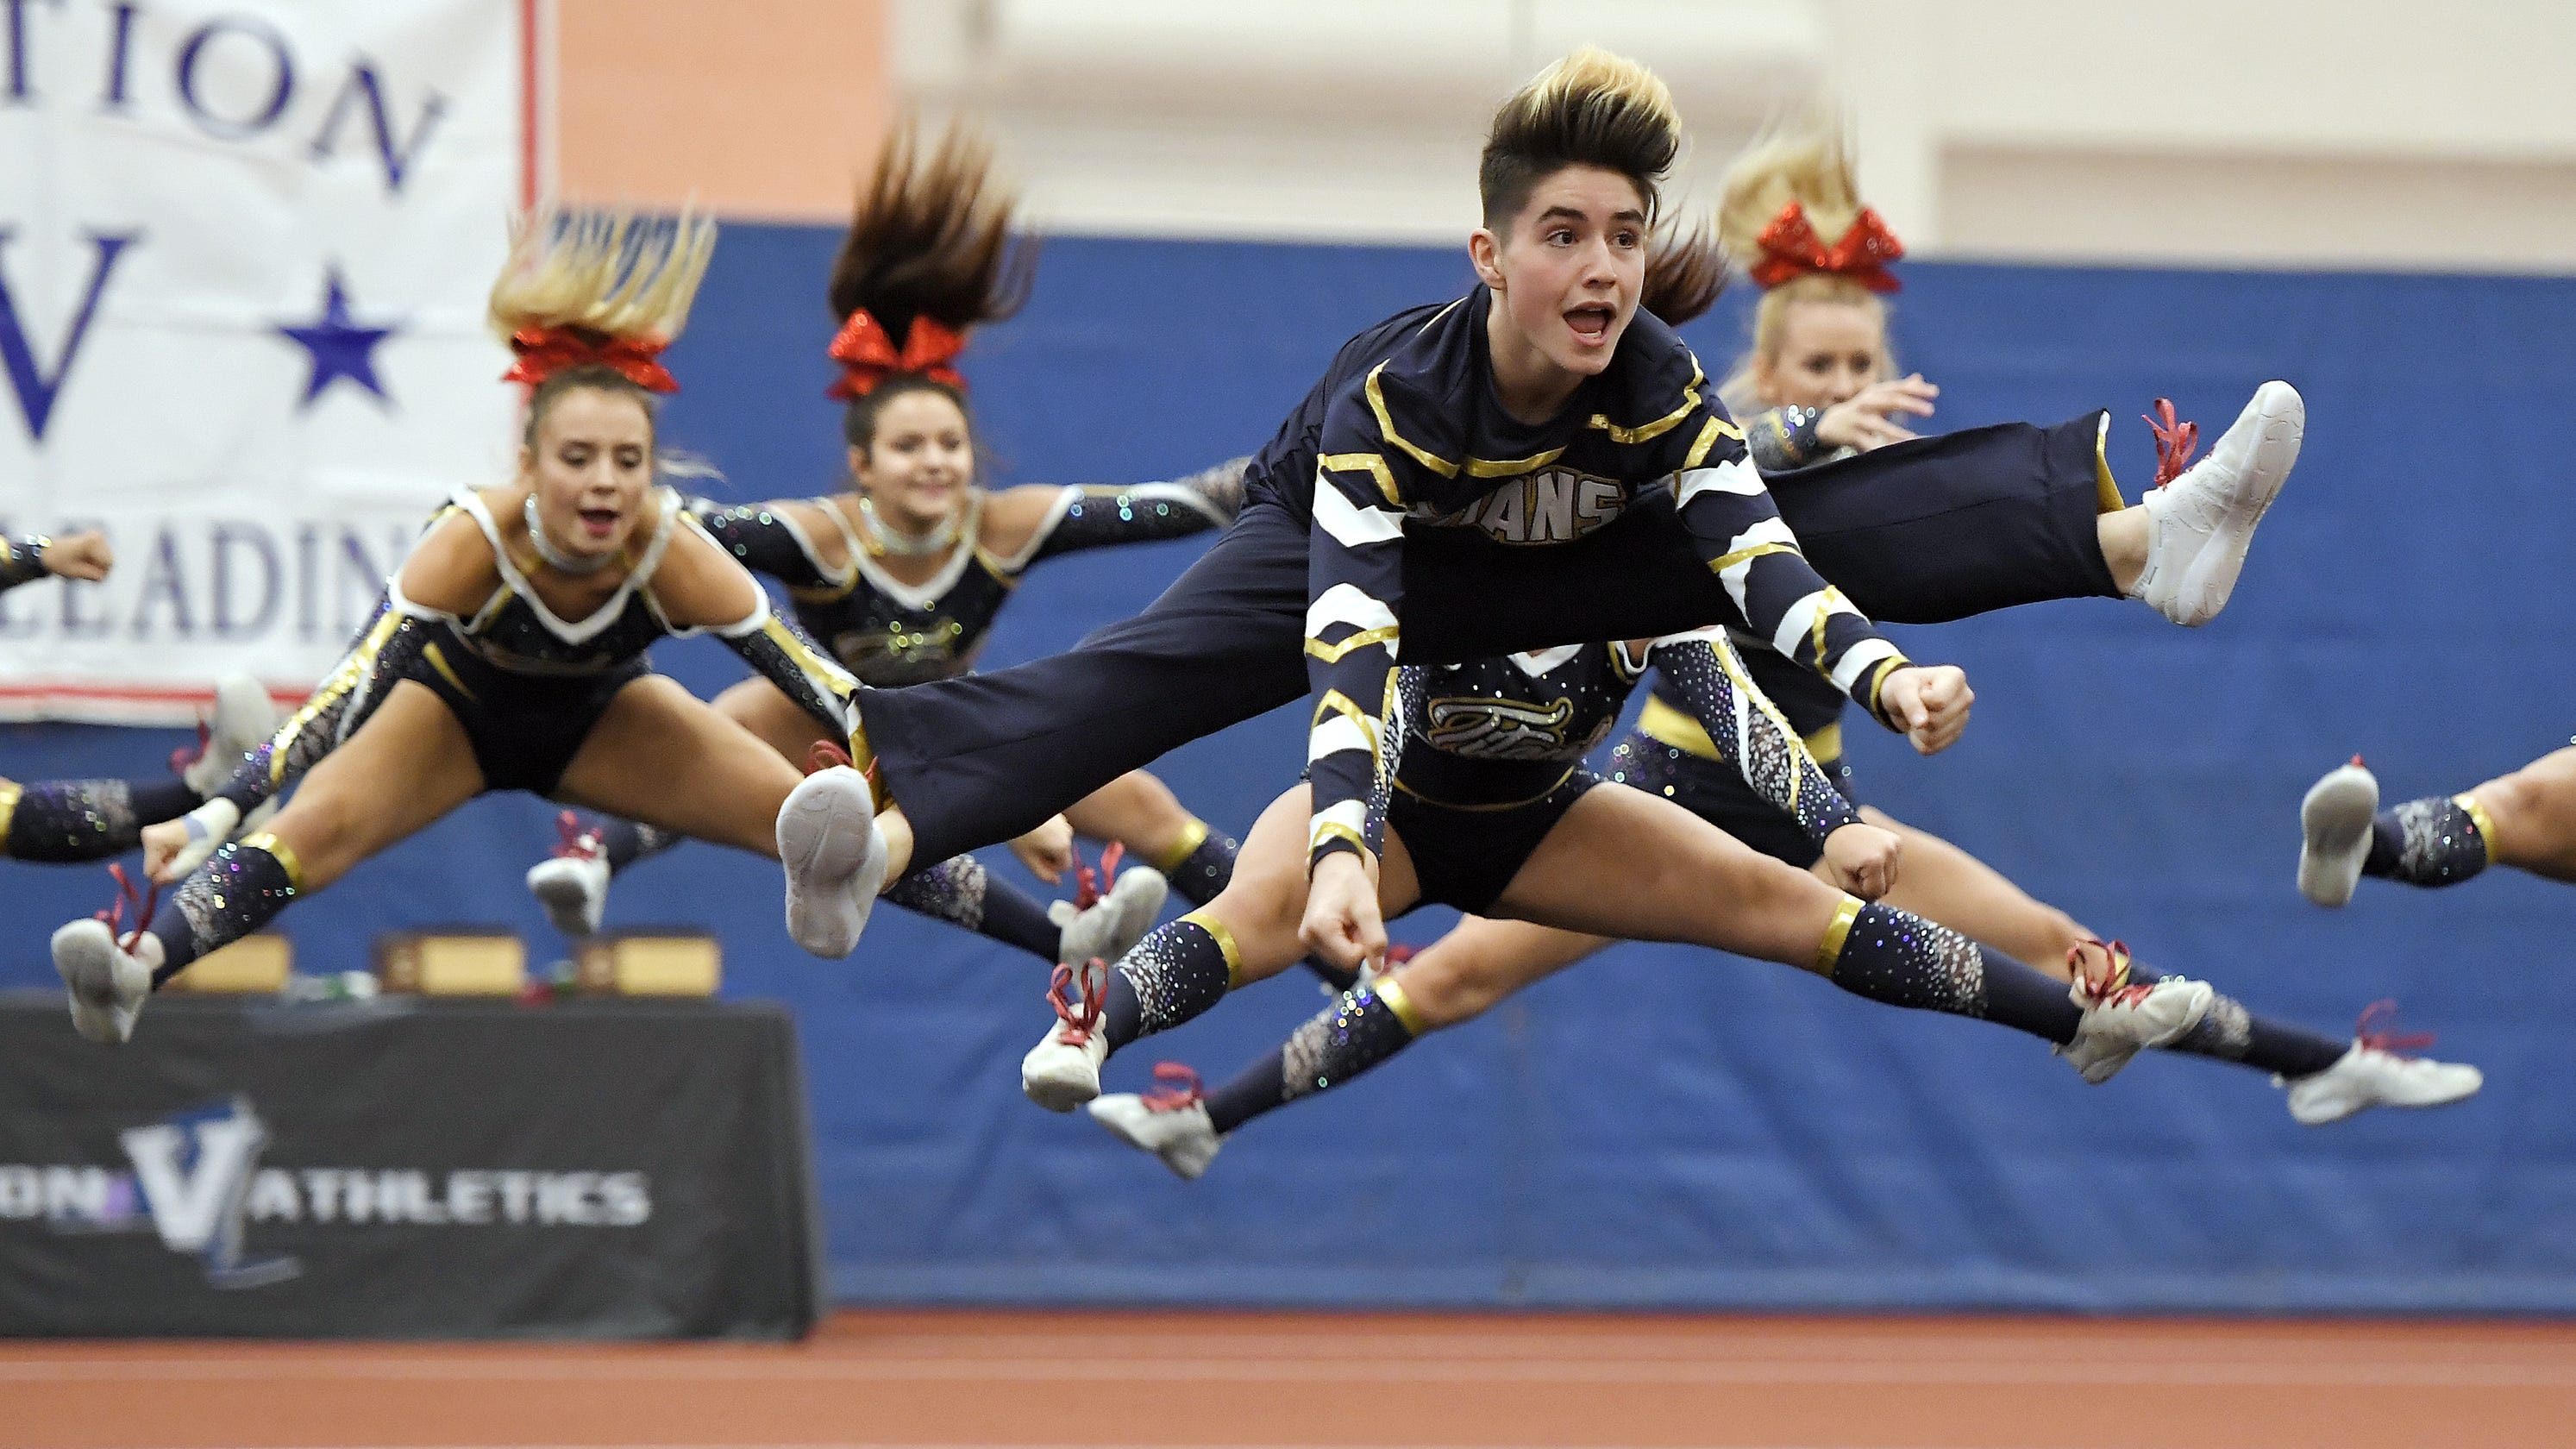 Webster Thomas, Fairport, Spencerport among Section V Fall Cheerleading champs